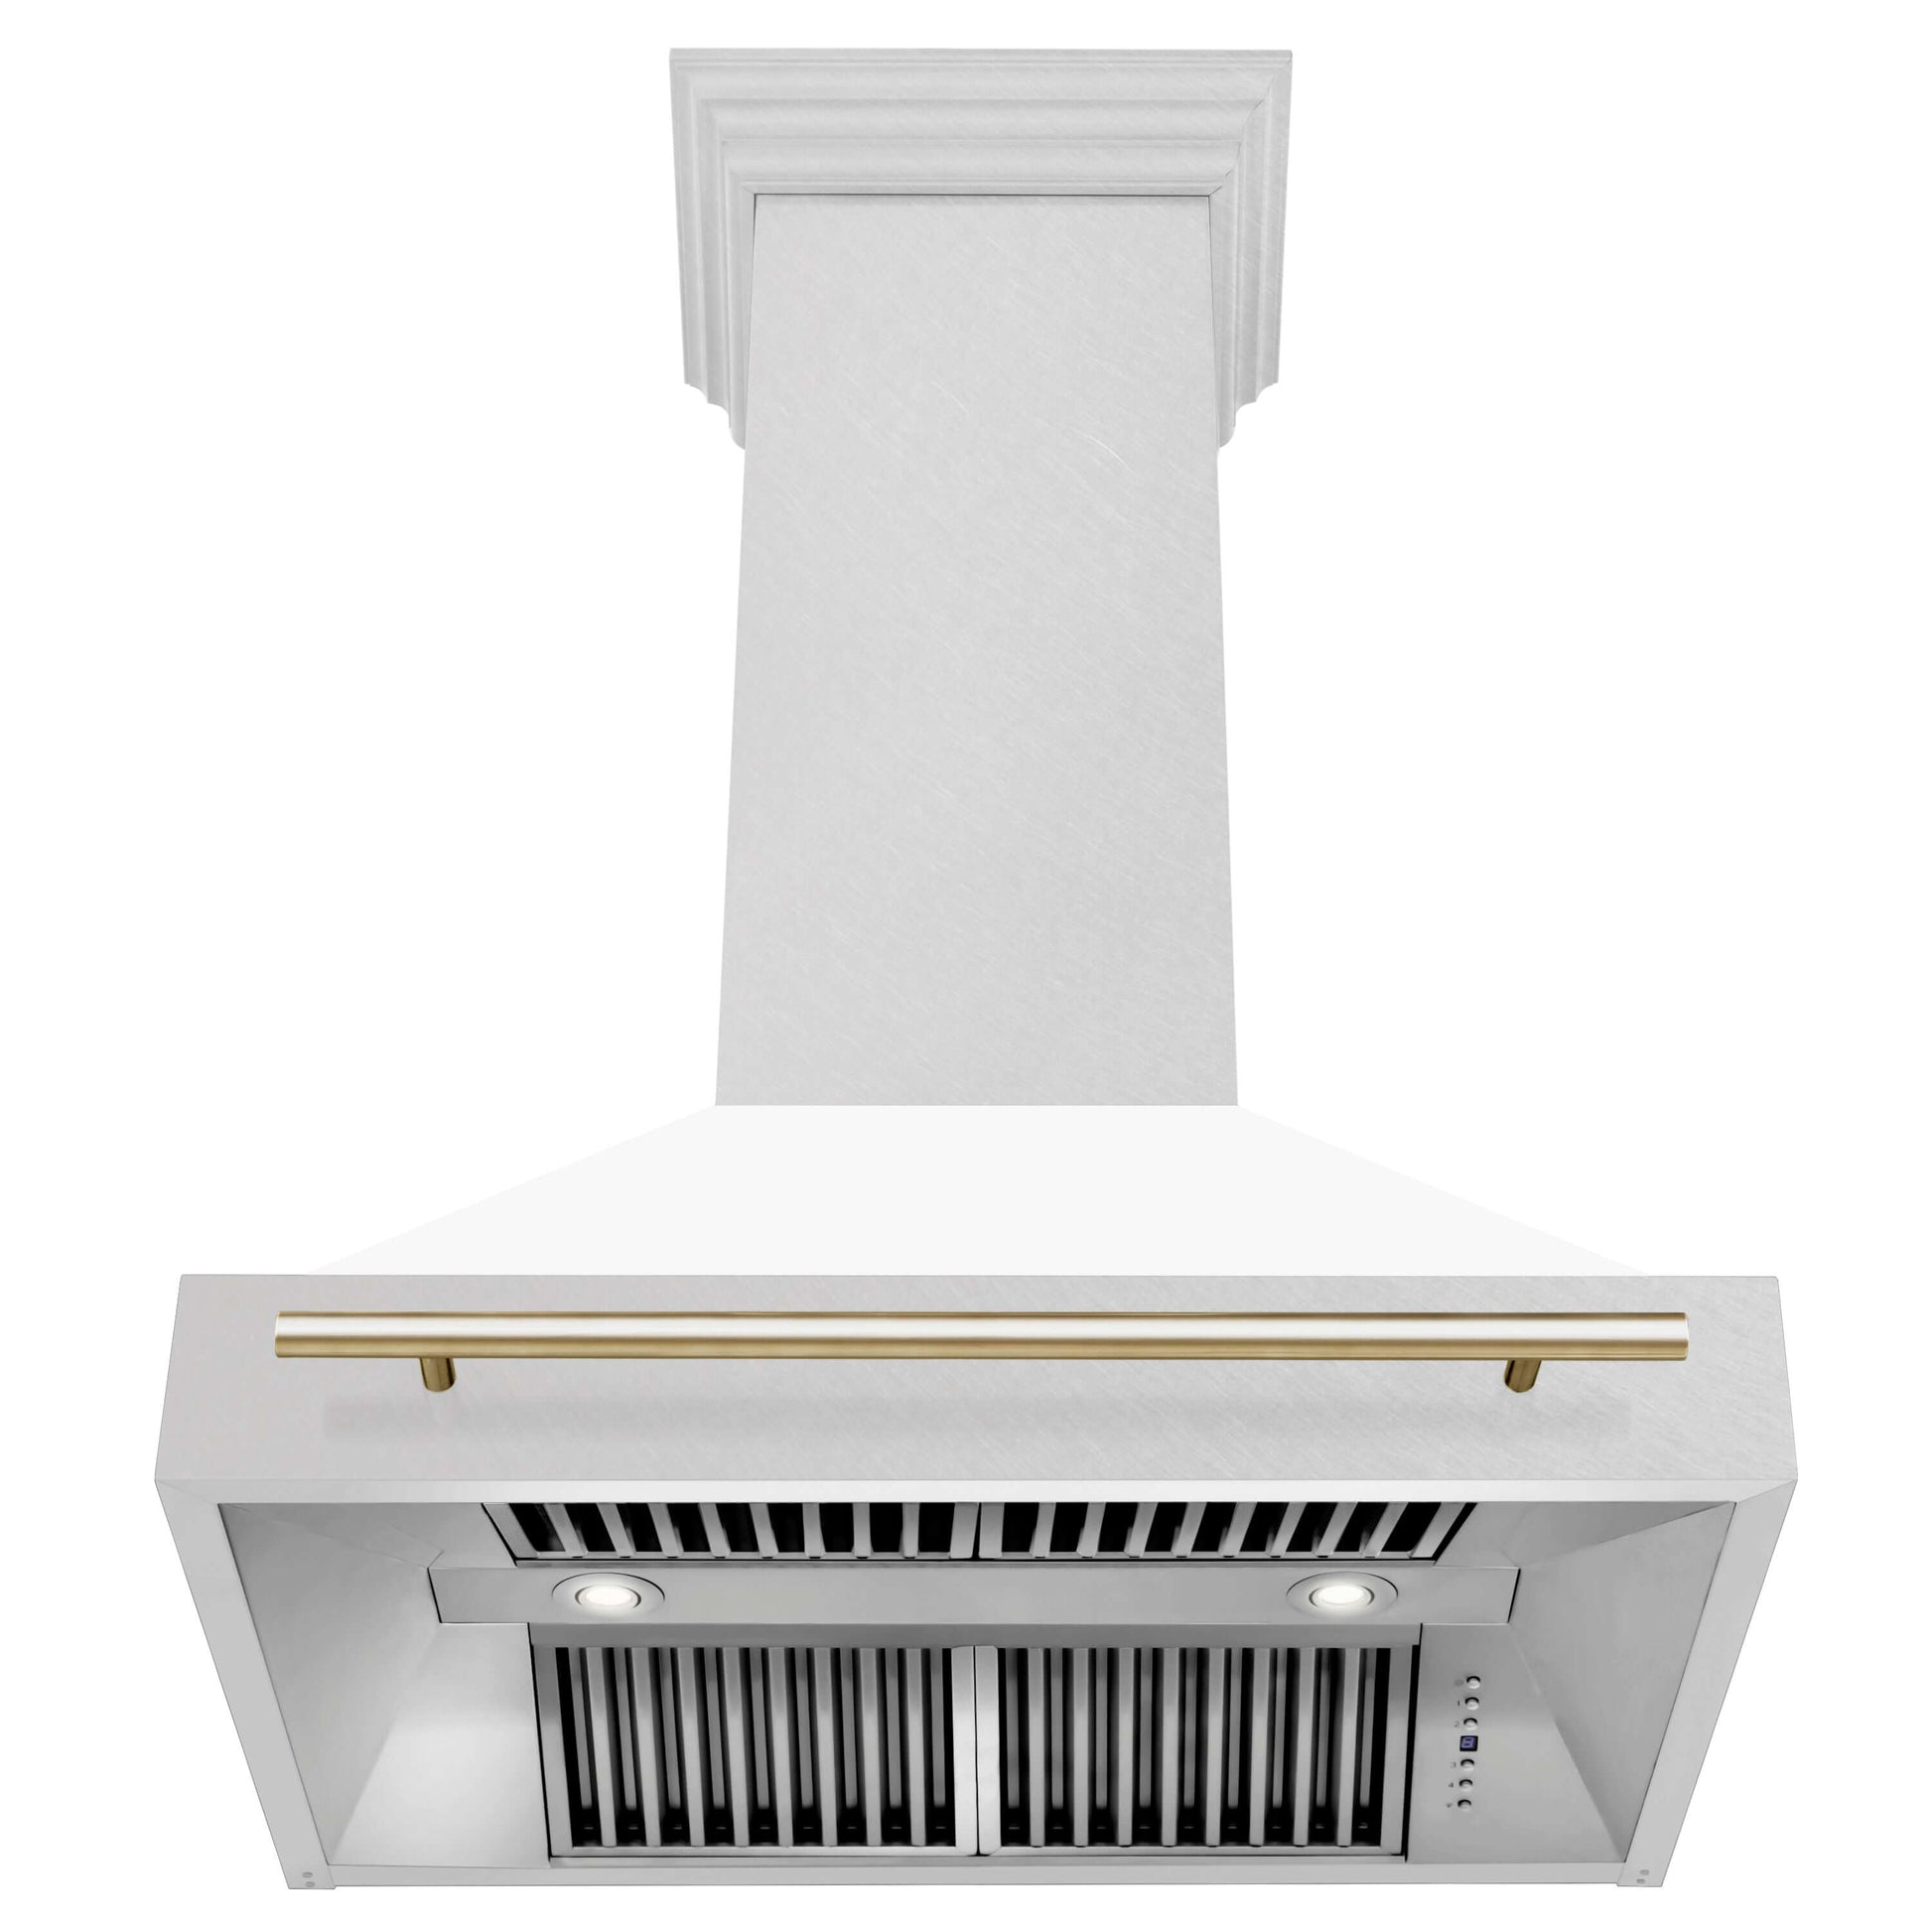 ZLINE Autograph Edition 36" Range Hood with DuraSnow Steel Shell - Matte White and Accented Handle